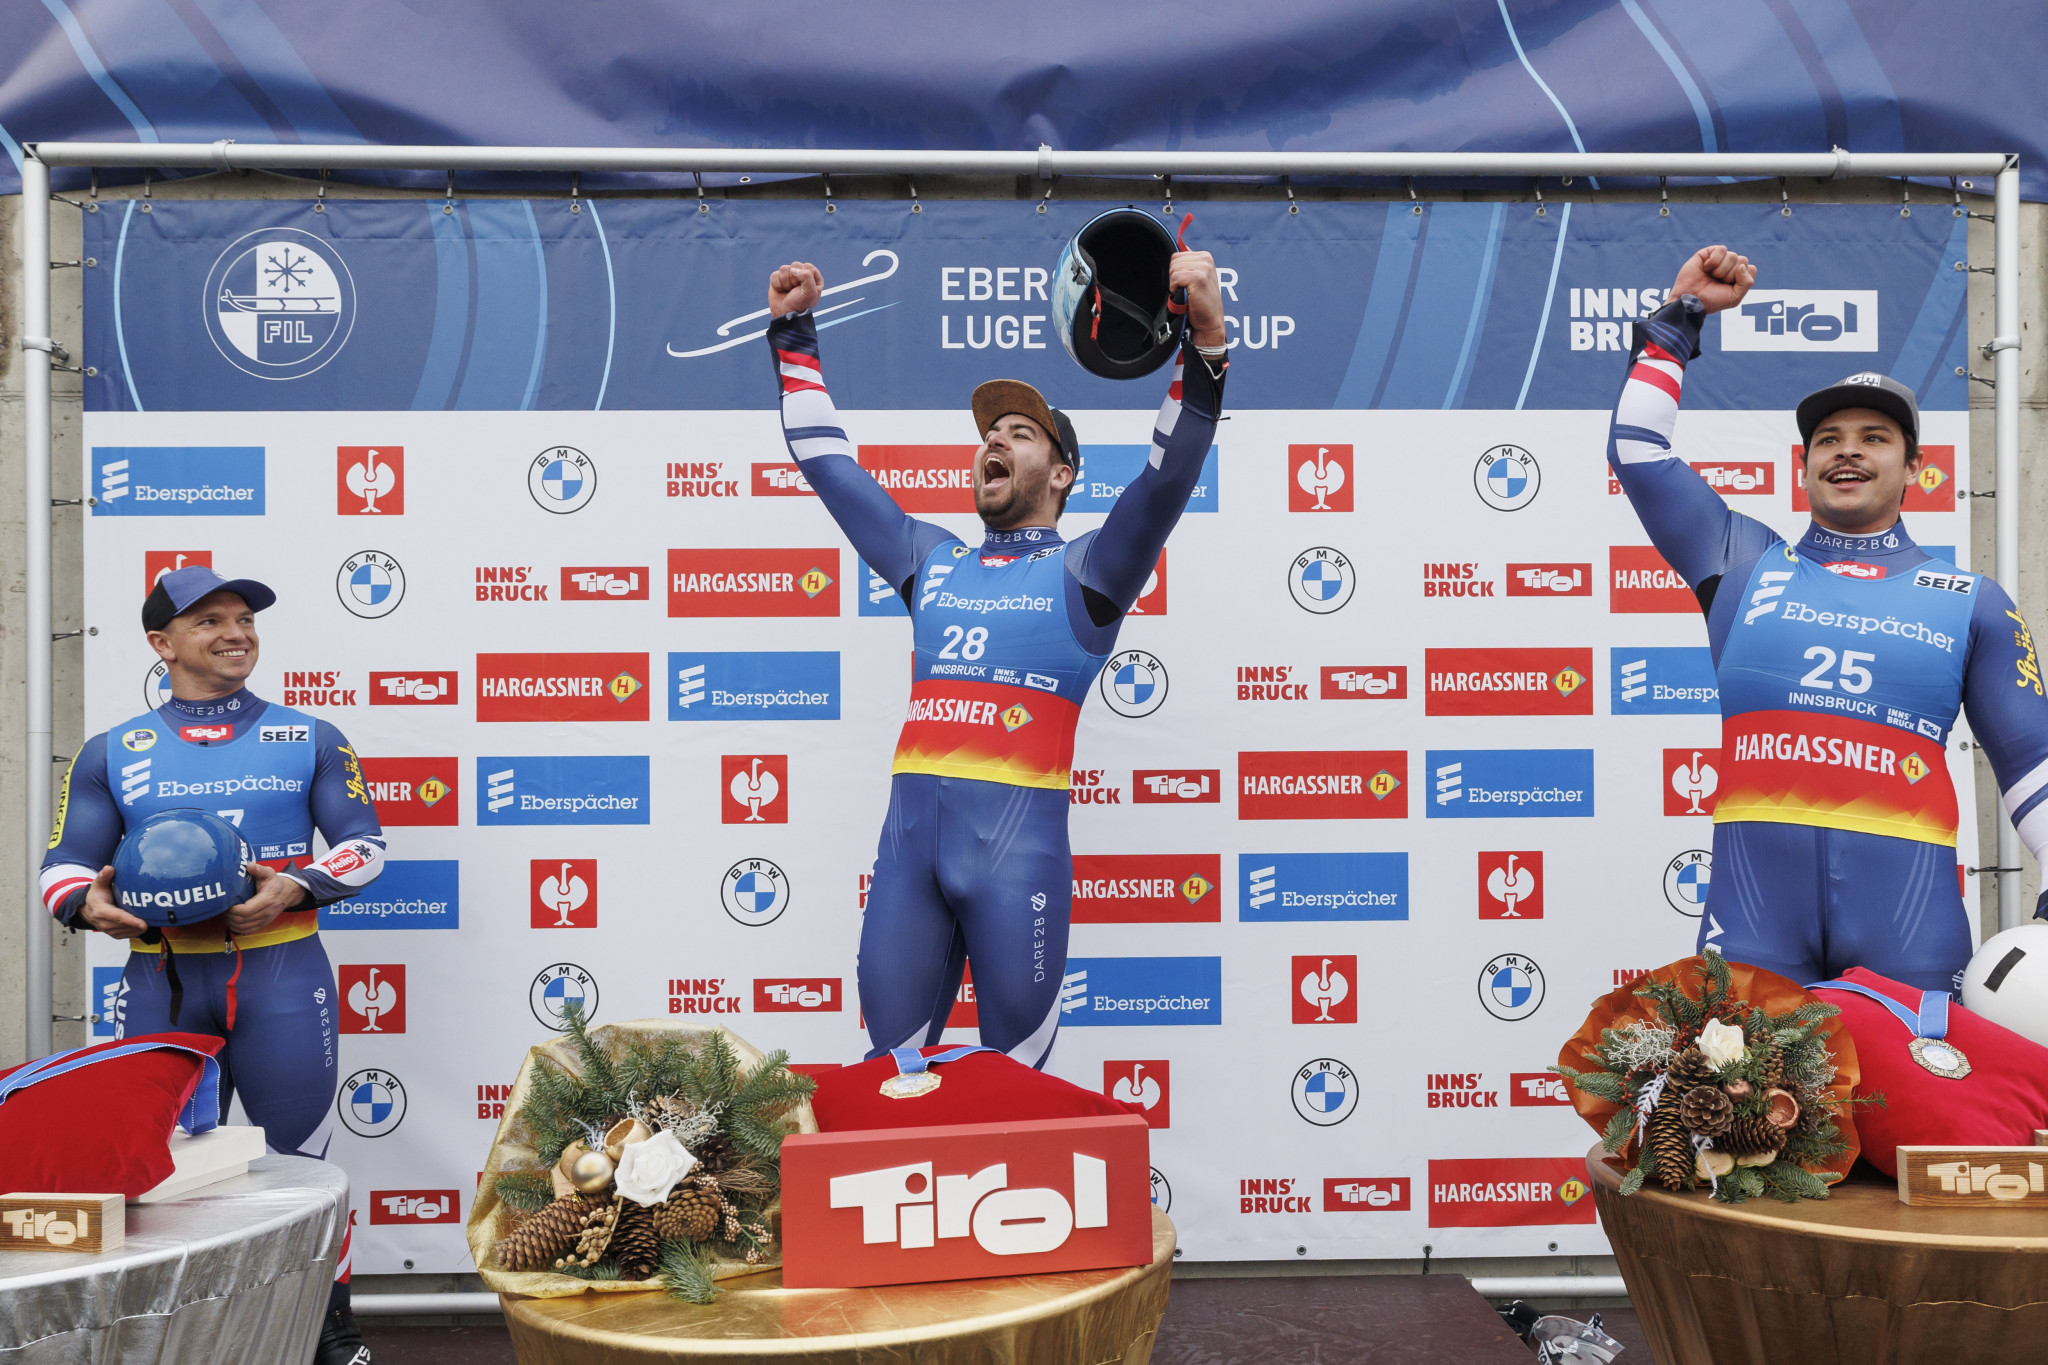 Gleirscher stars at Luge World Cup in Innsbruck with double gold